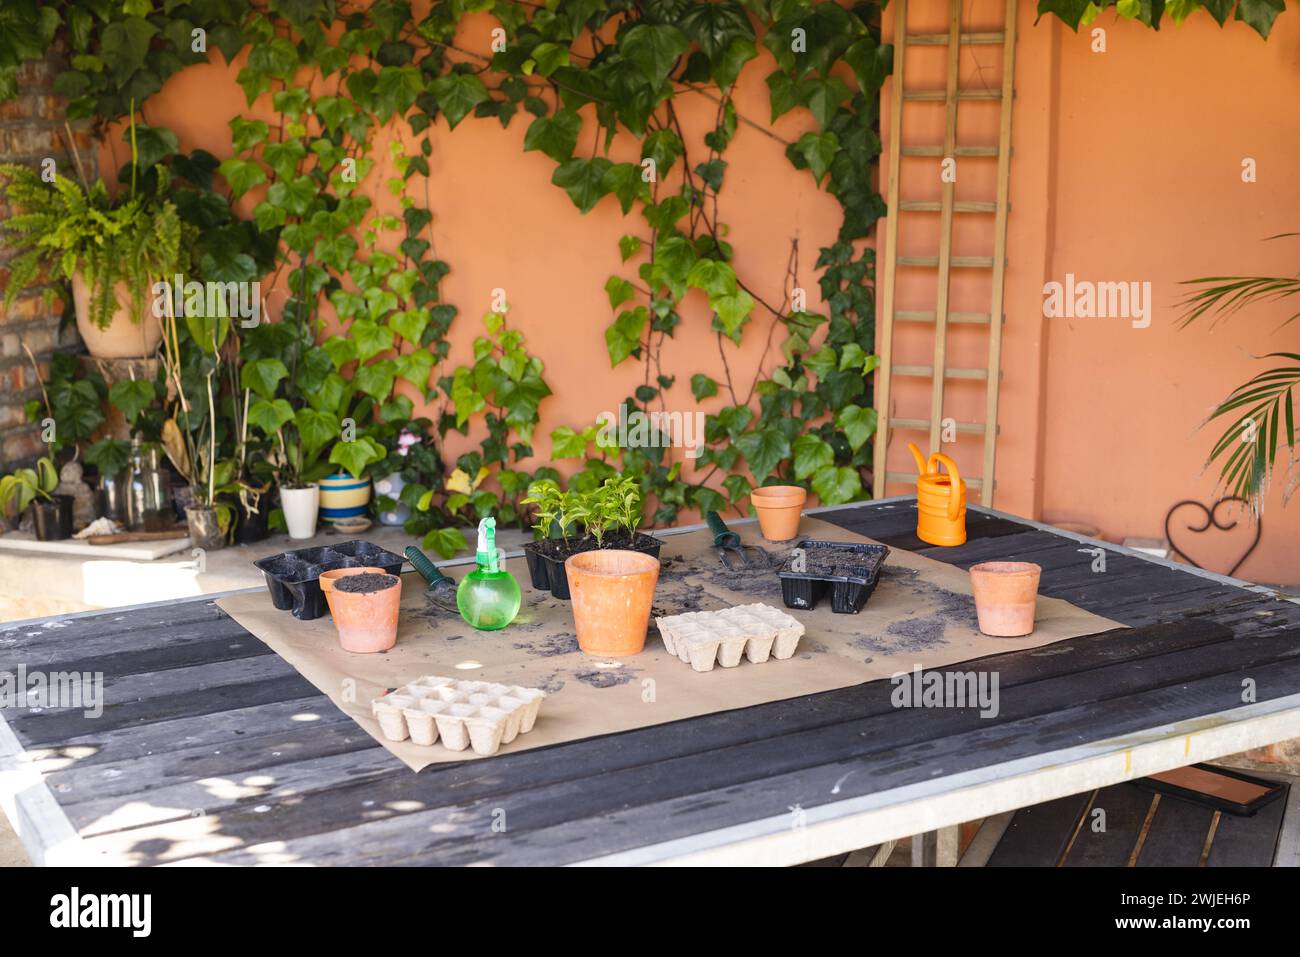 Gardening tools and plants are ready on a table outdoor Stock Photo